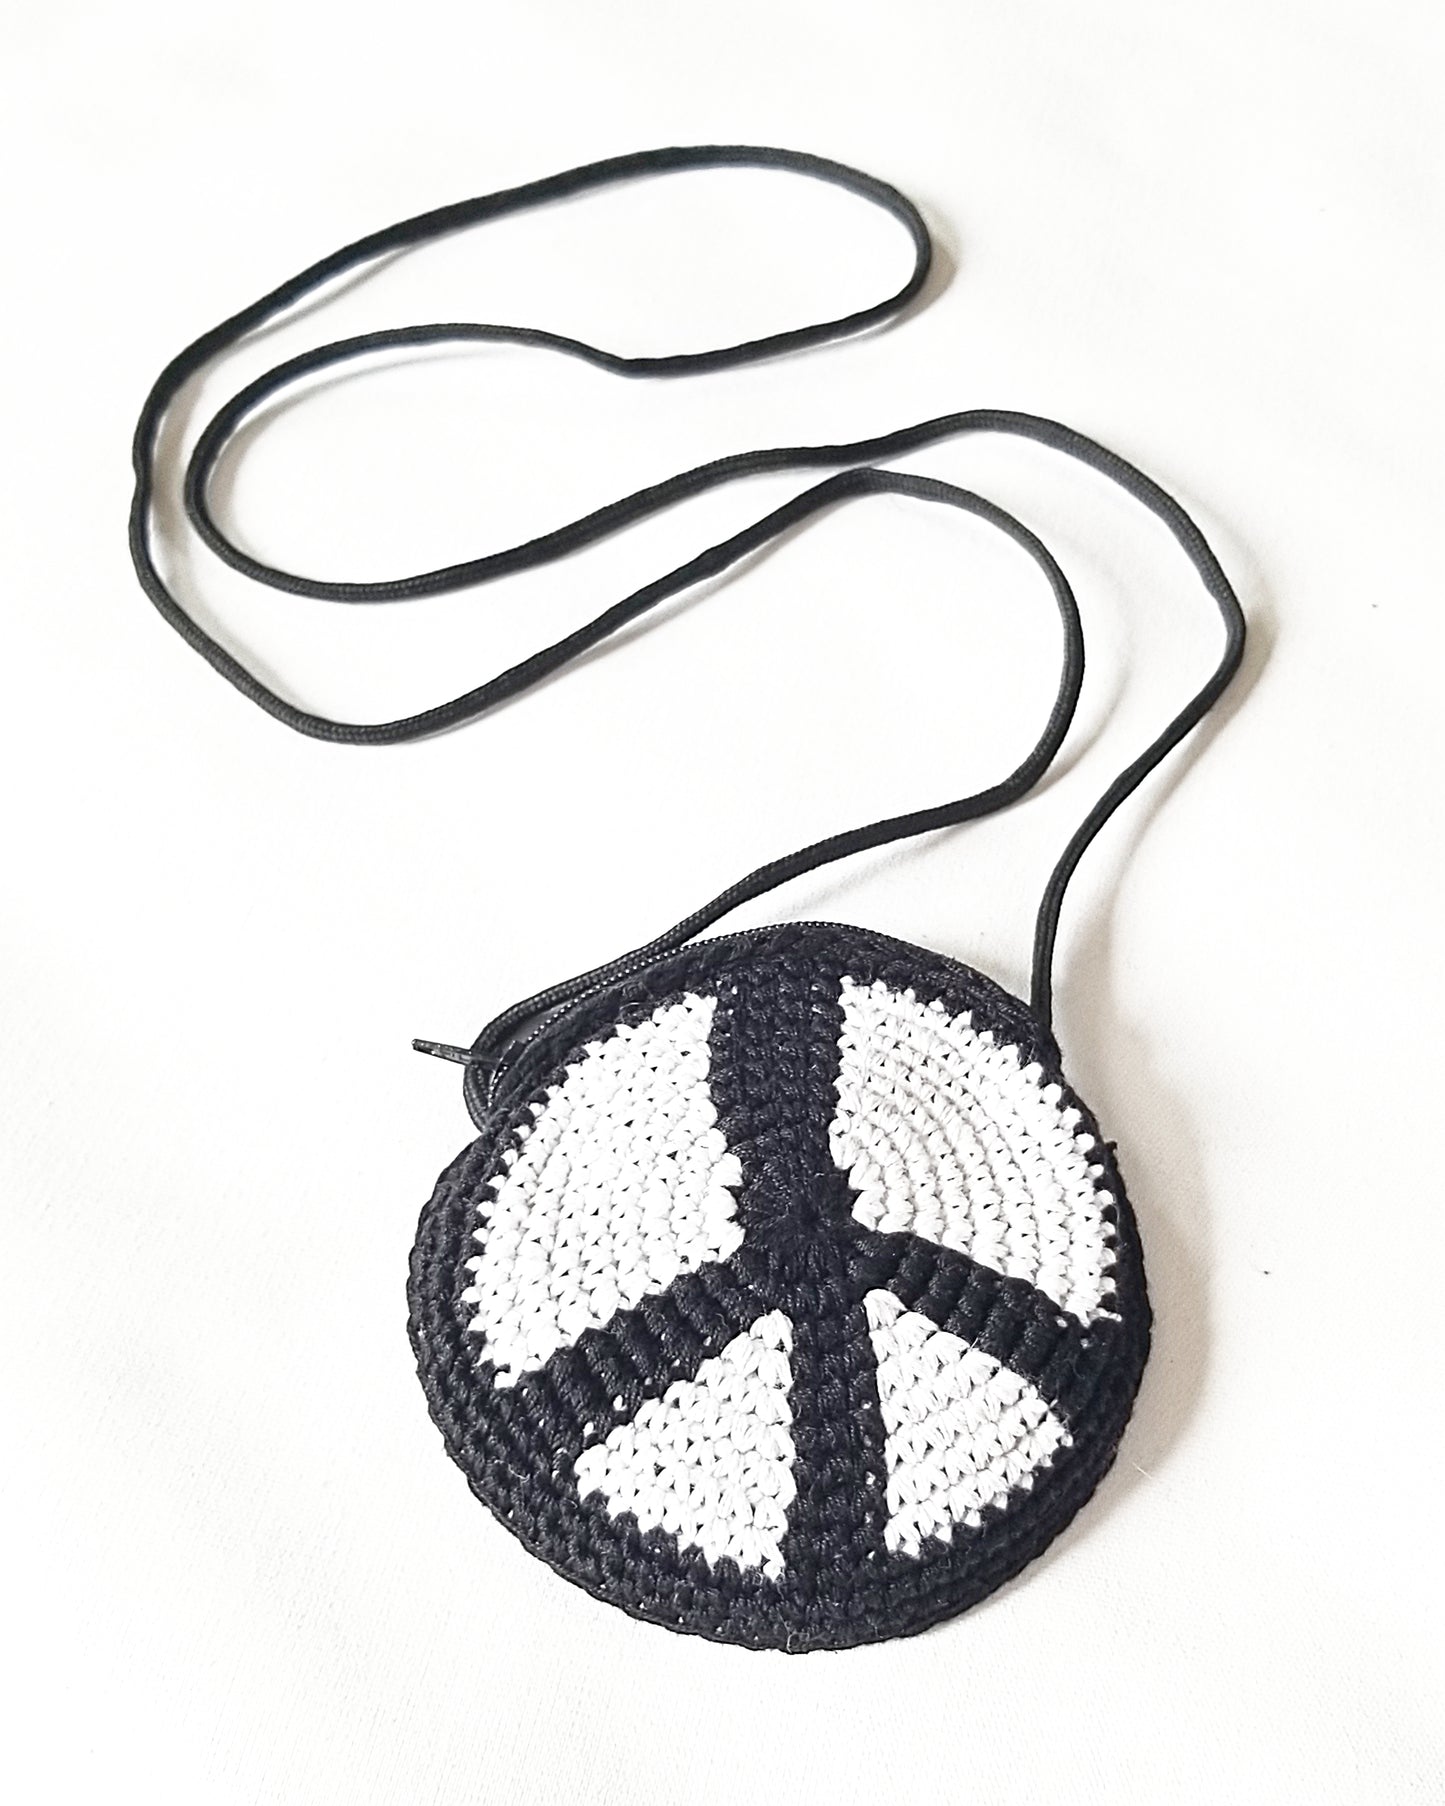 white crochet peace sign coin purse at the boho hippie hut